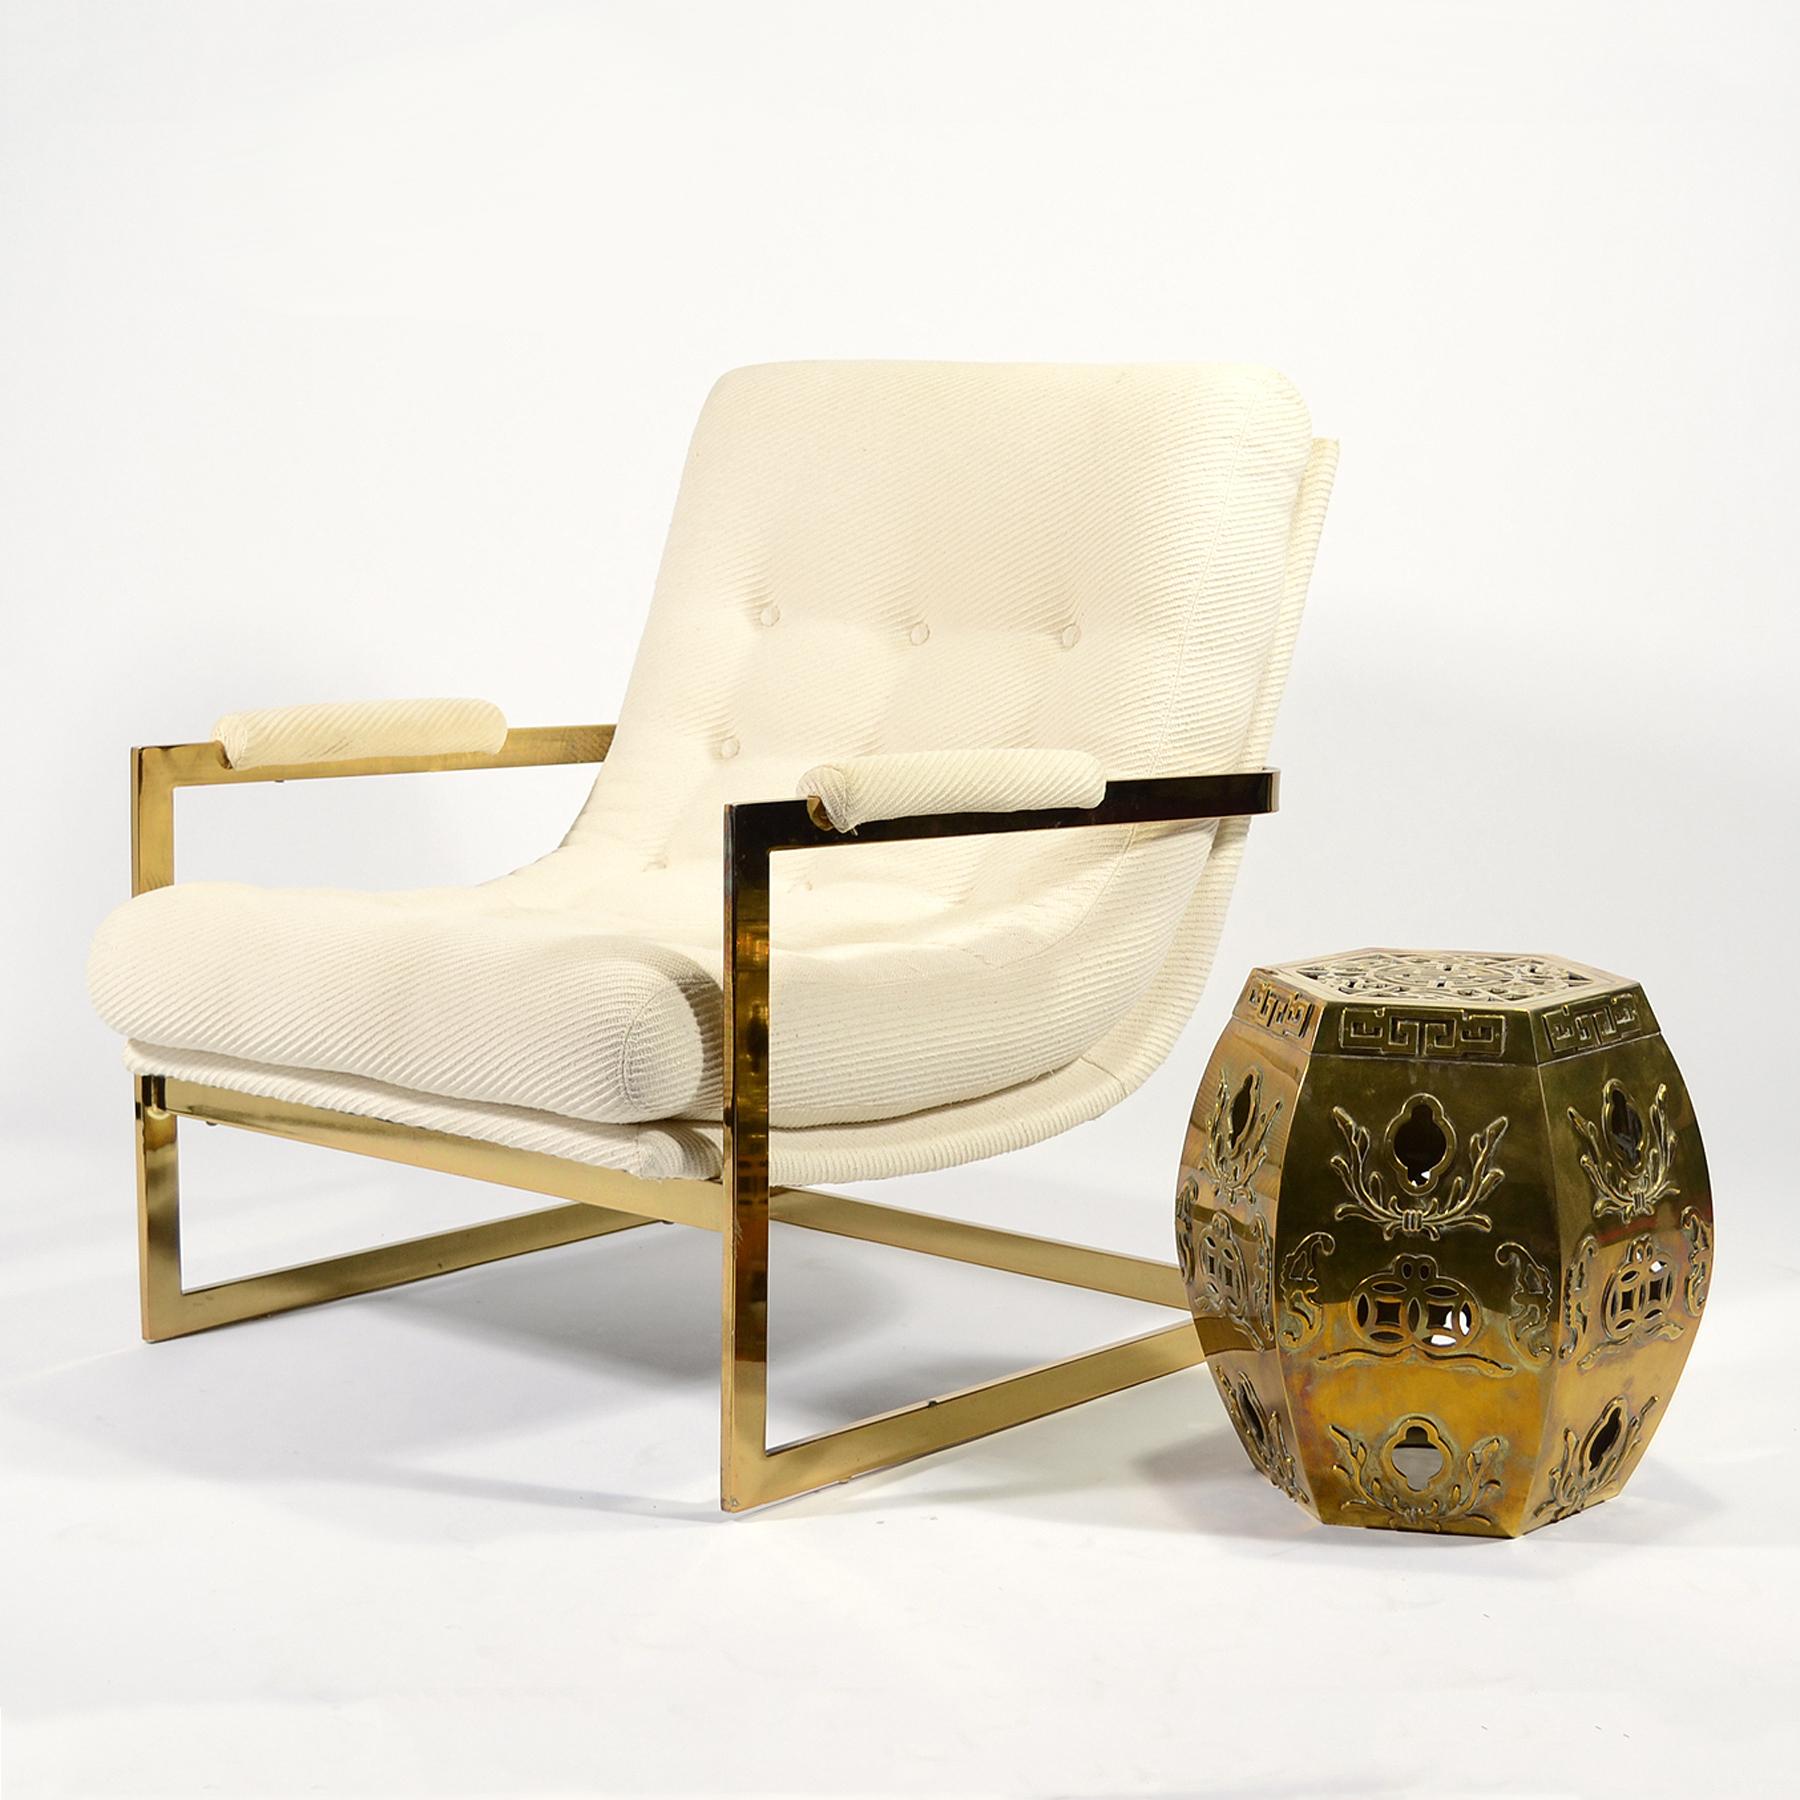 Chinese Brass Asian Garden Side Table/ Stool